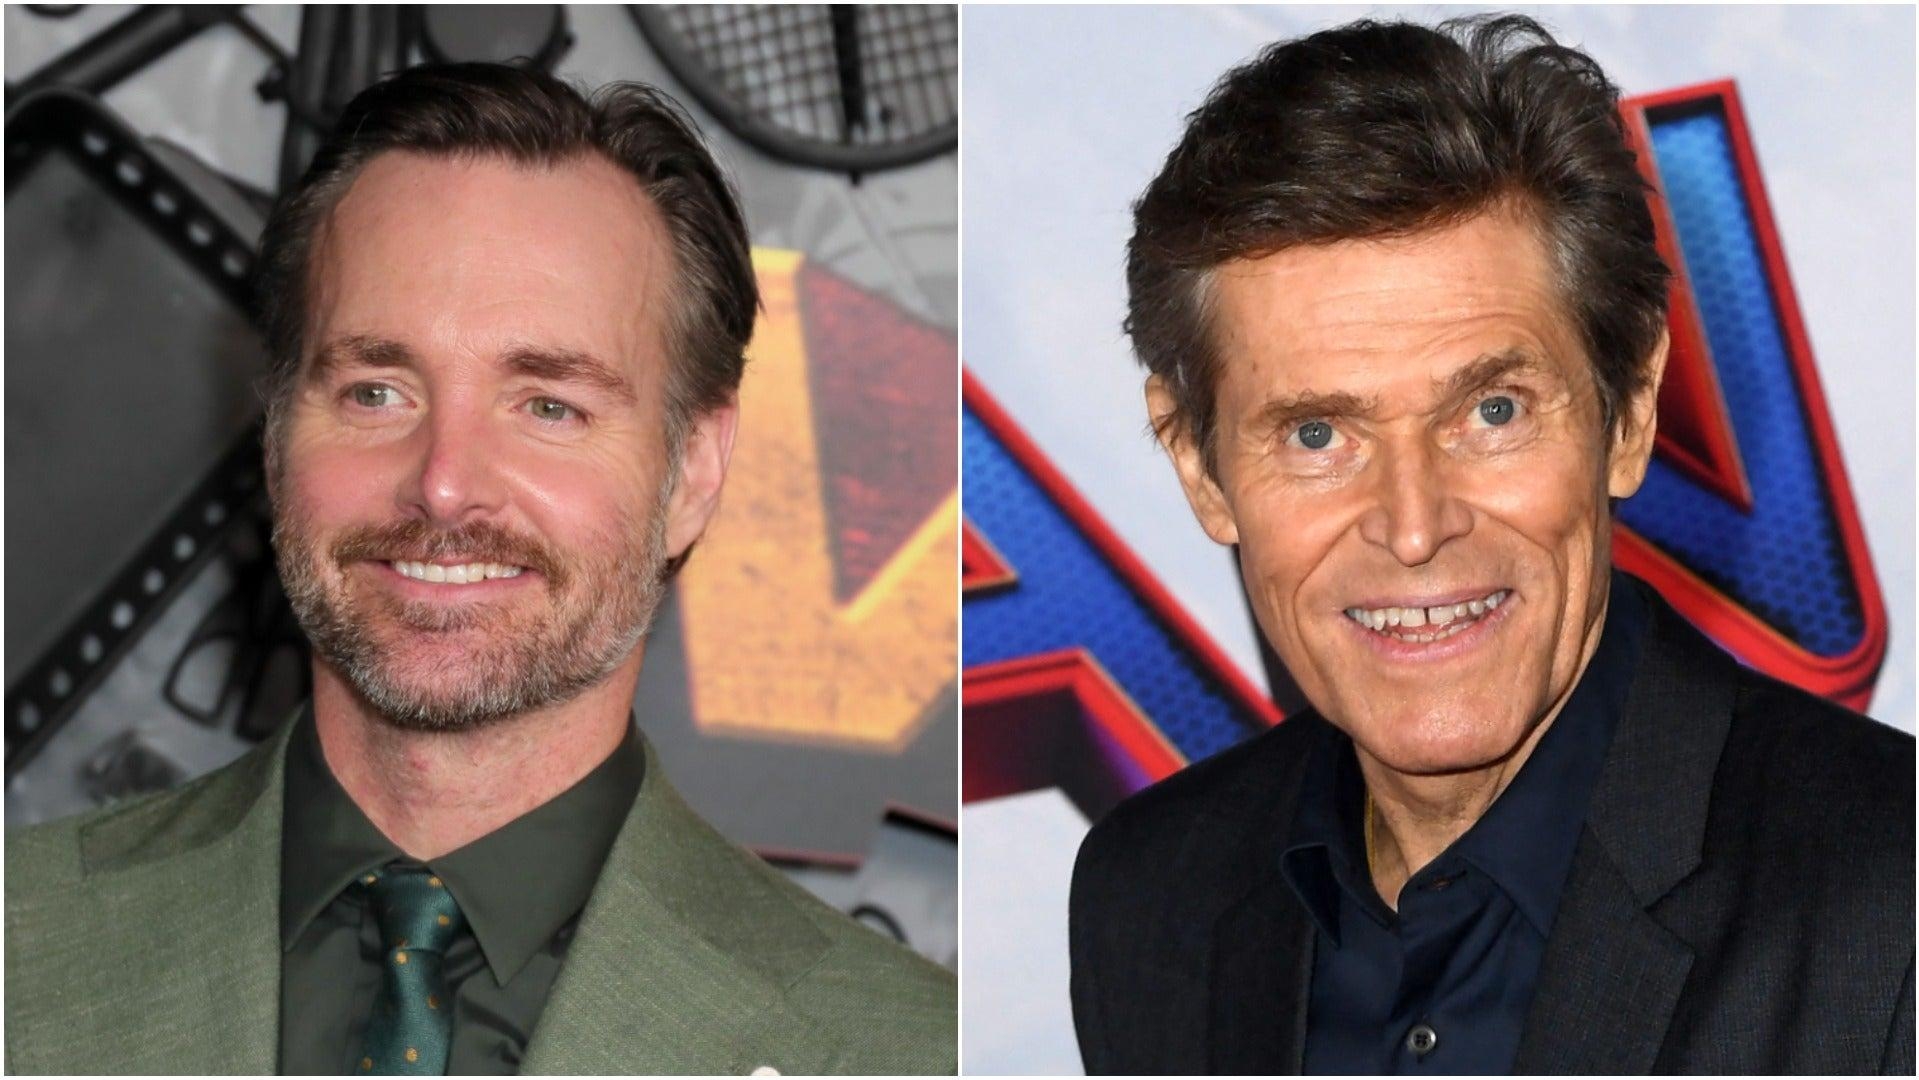 Will Forte and Willem Dafoe are next up to host SNL